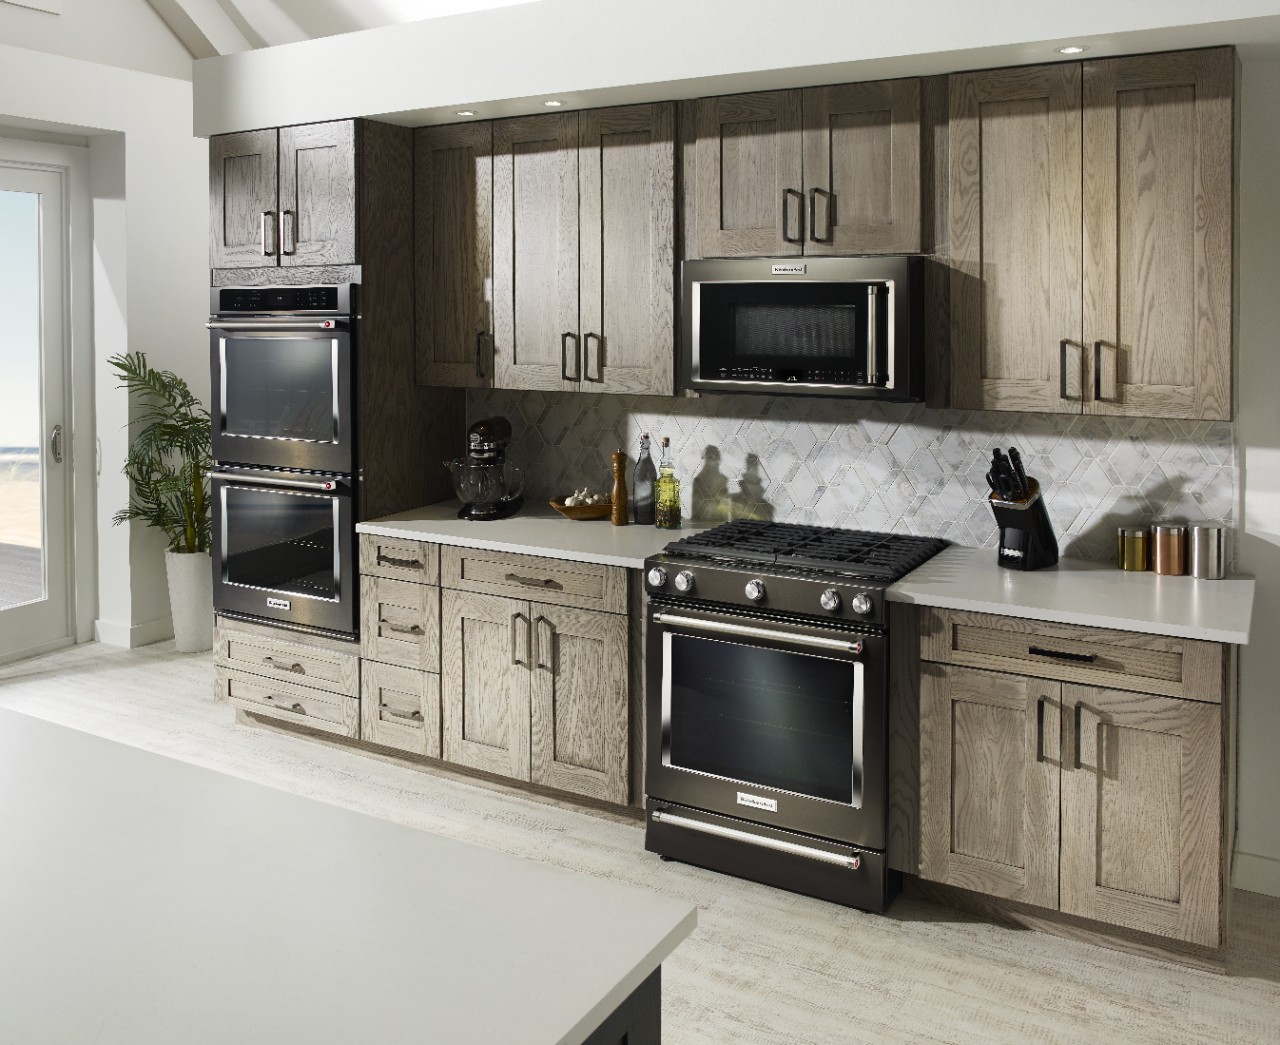 See All Microwave Oven Options from KitchenAid